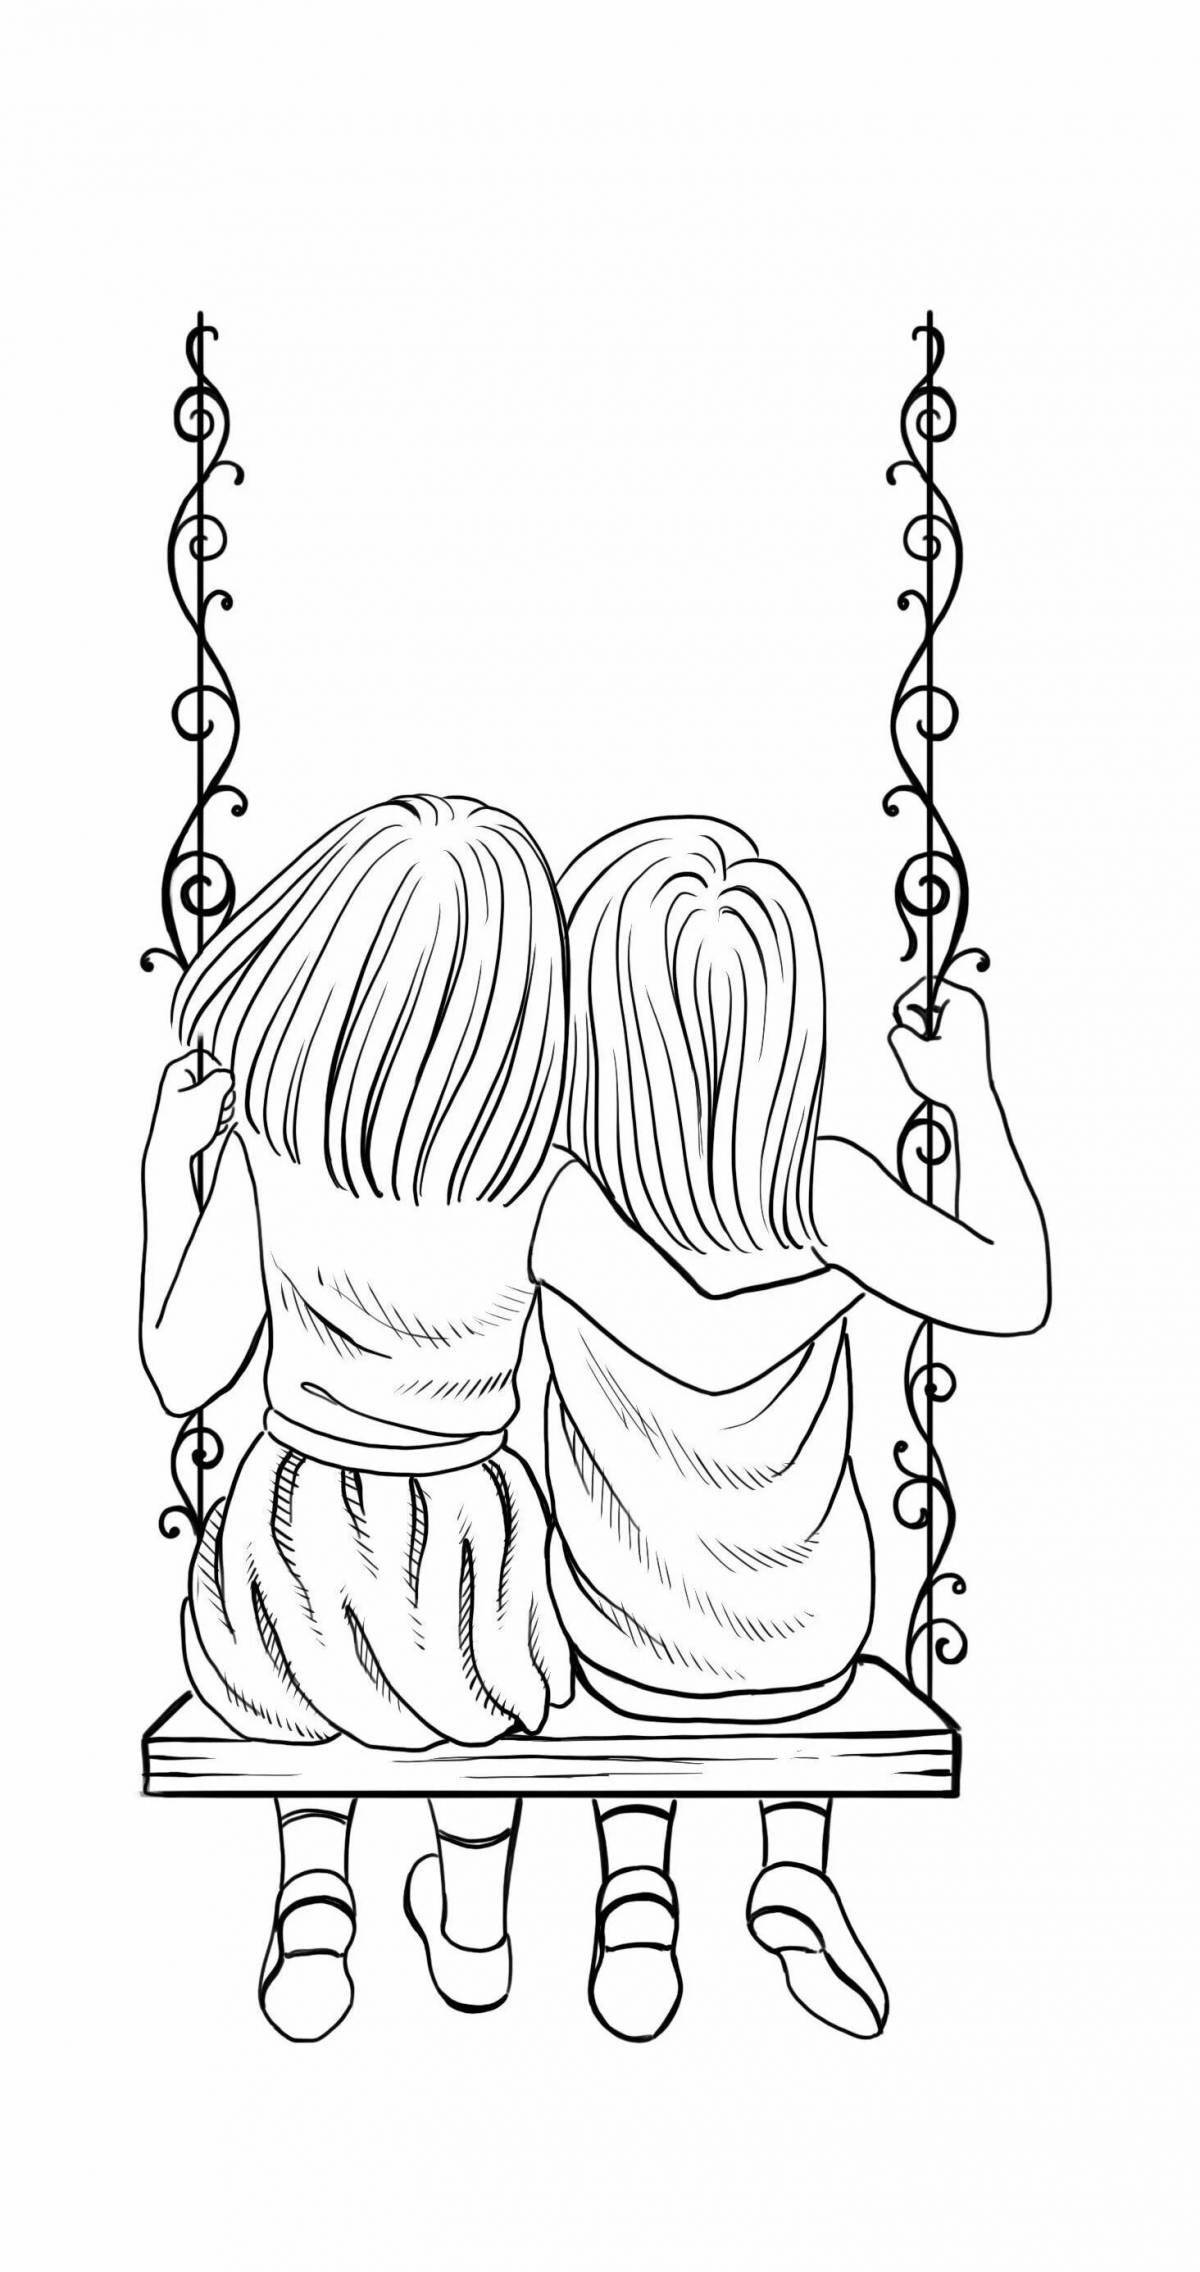 Coloring page excited girls on a swing